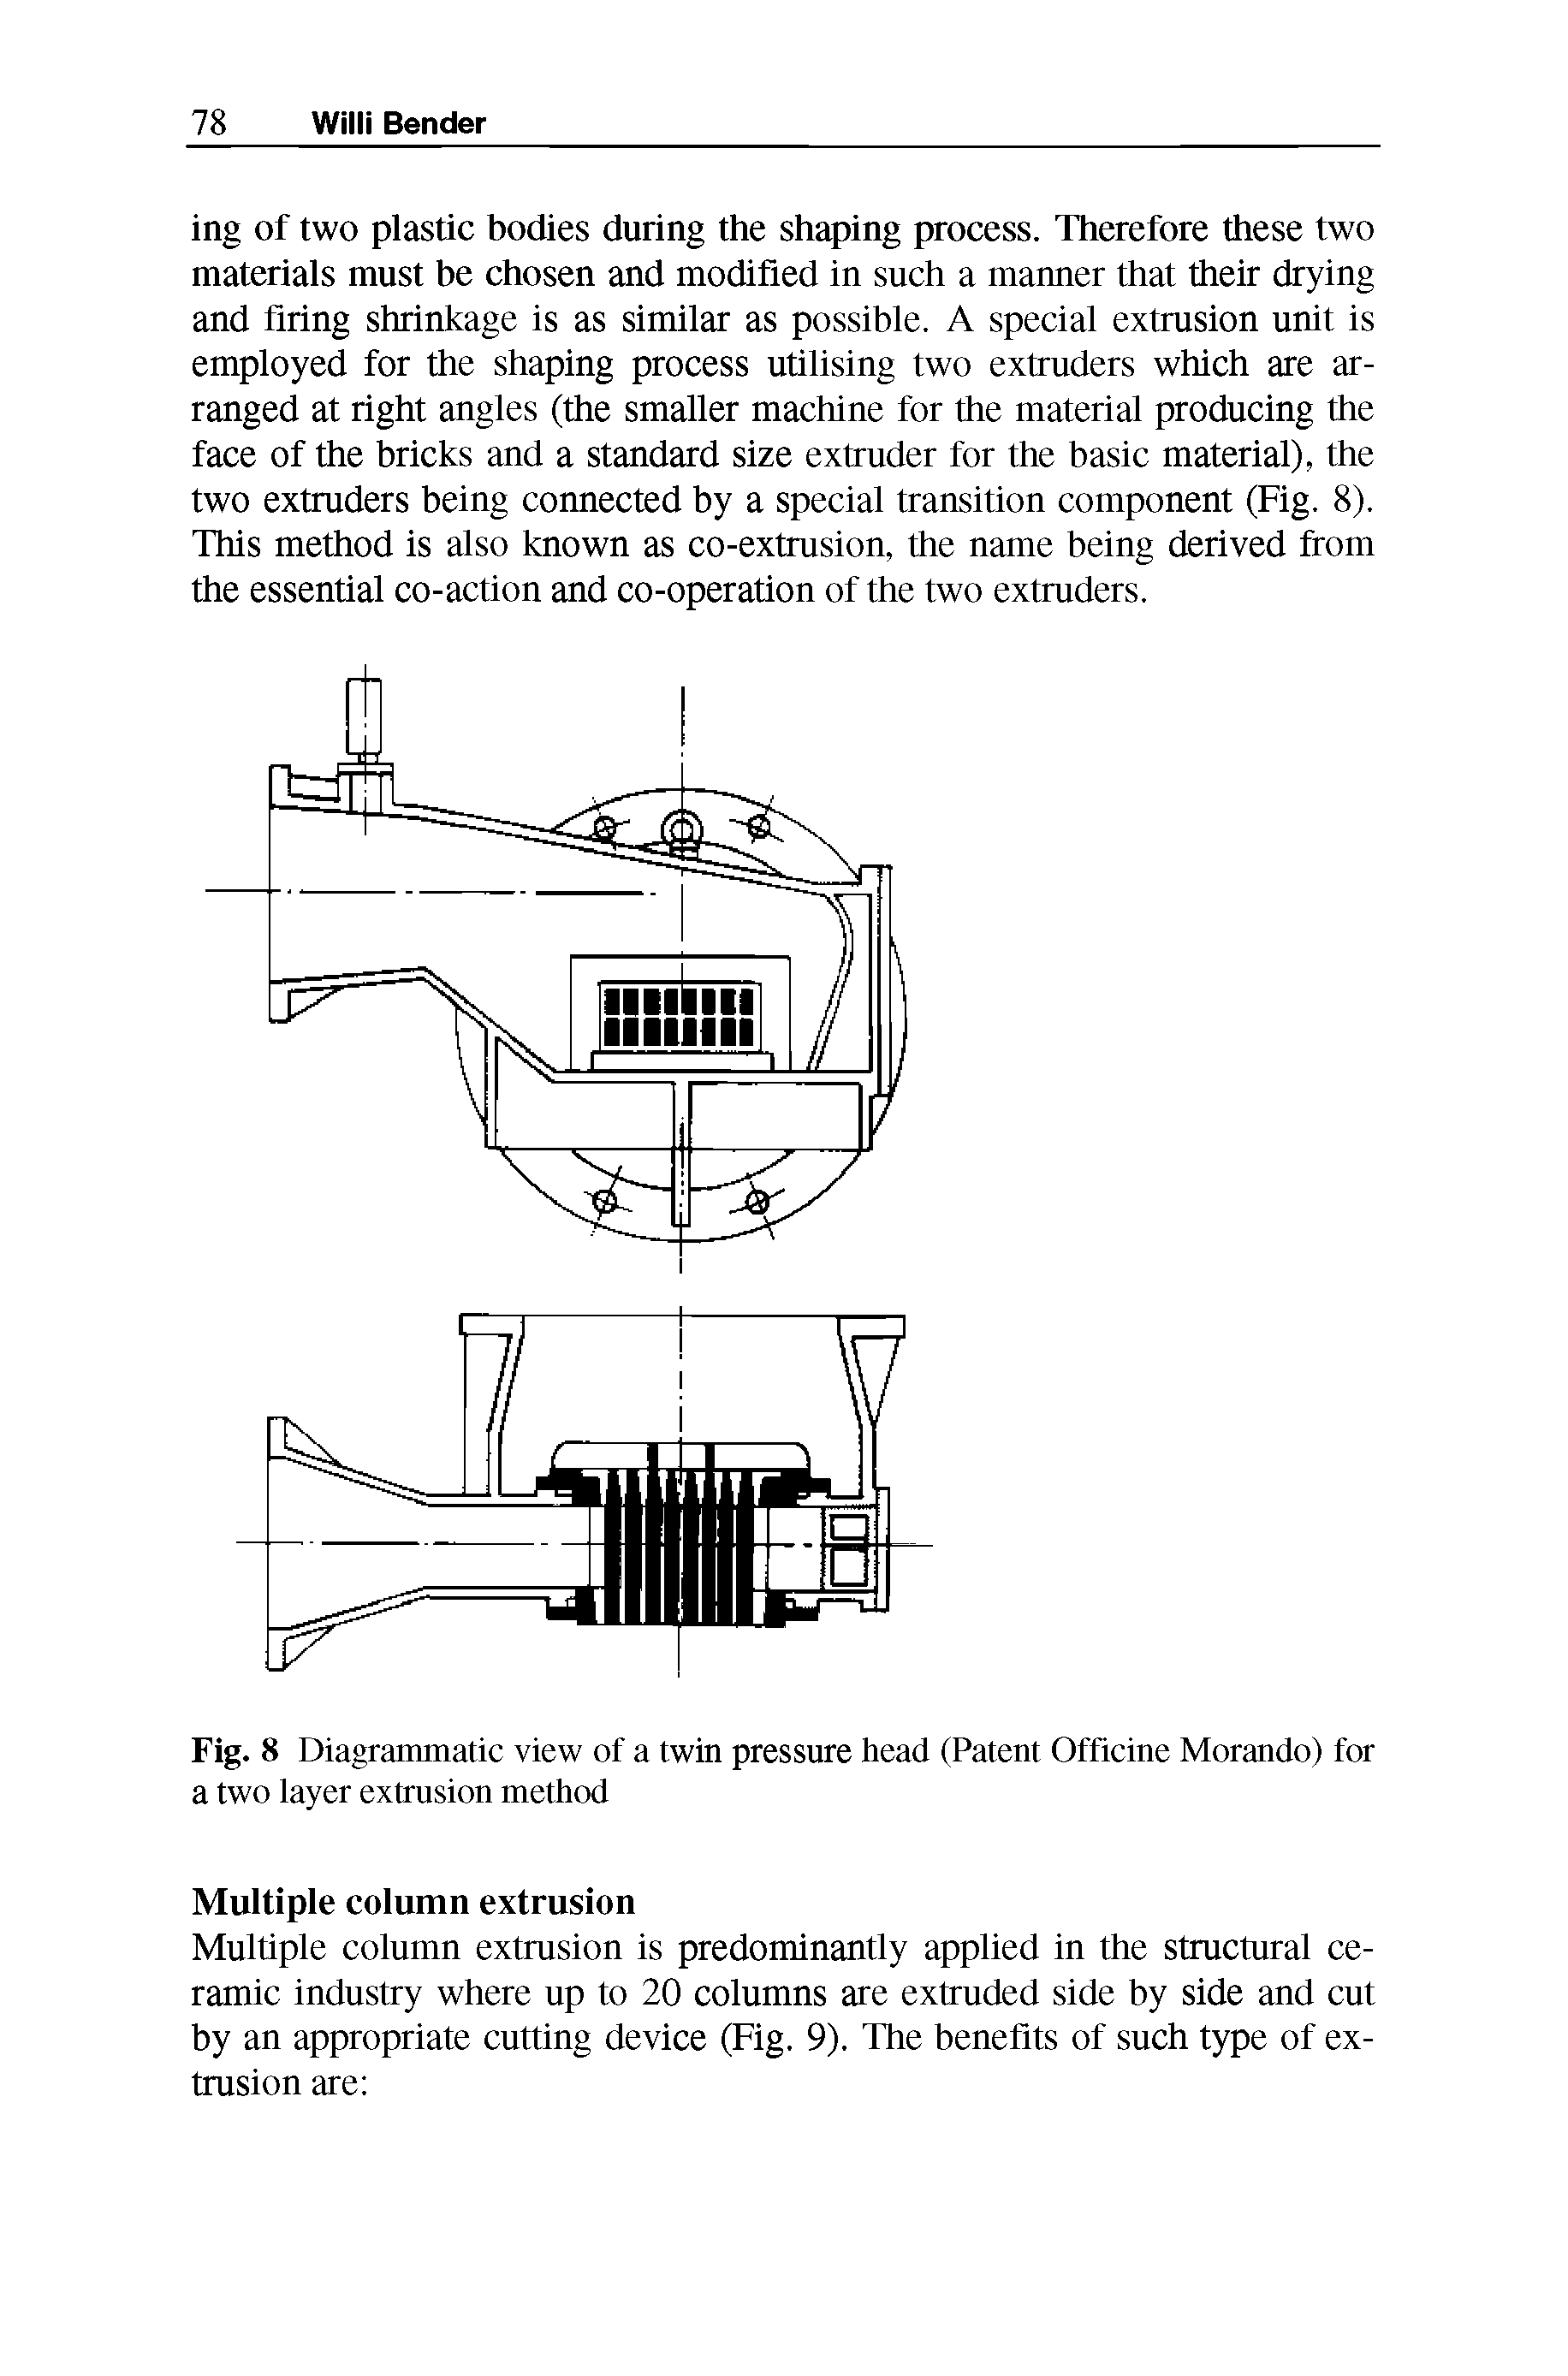 Fig. 8 Diagrammatic view of a twin pressure head (Patent Officine Morando) for a two layer extrusion method...